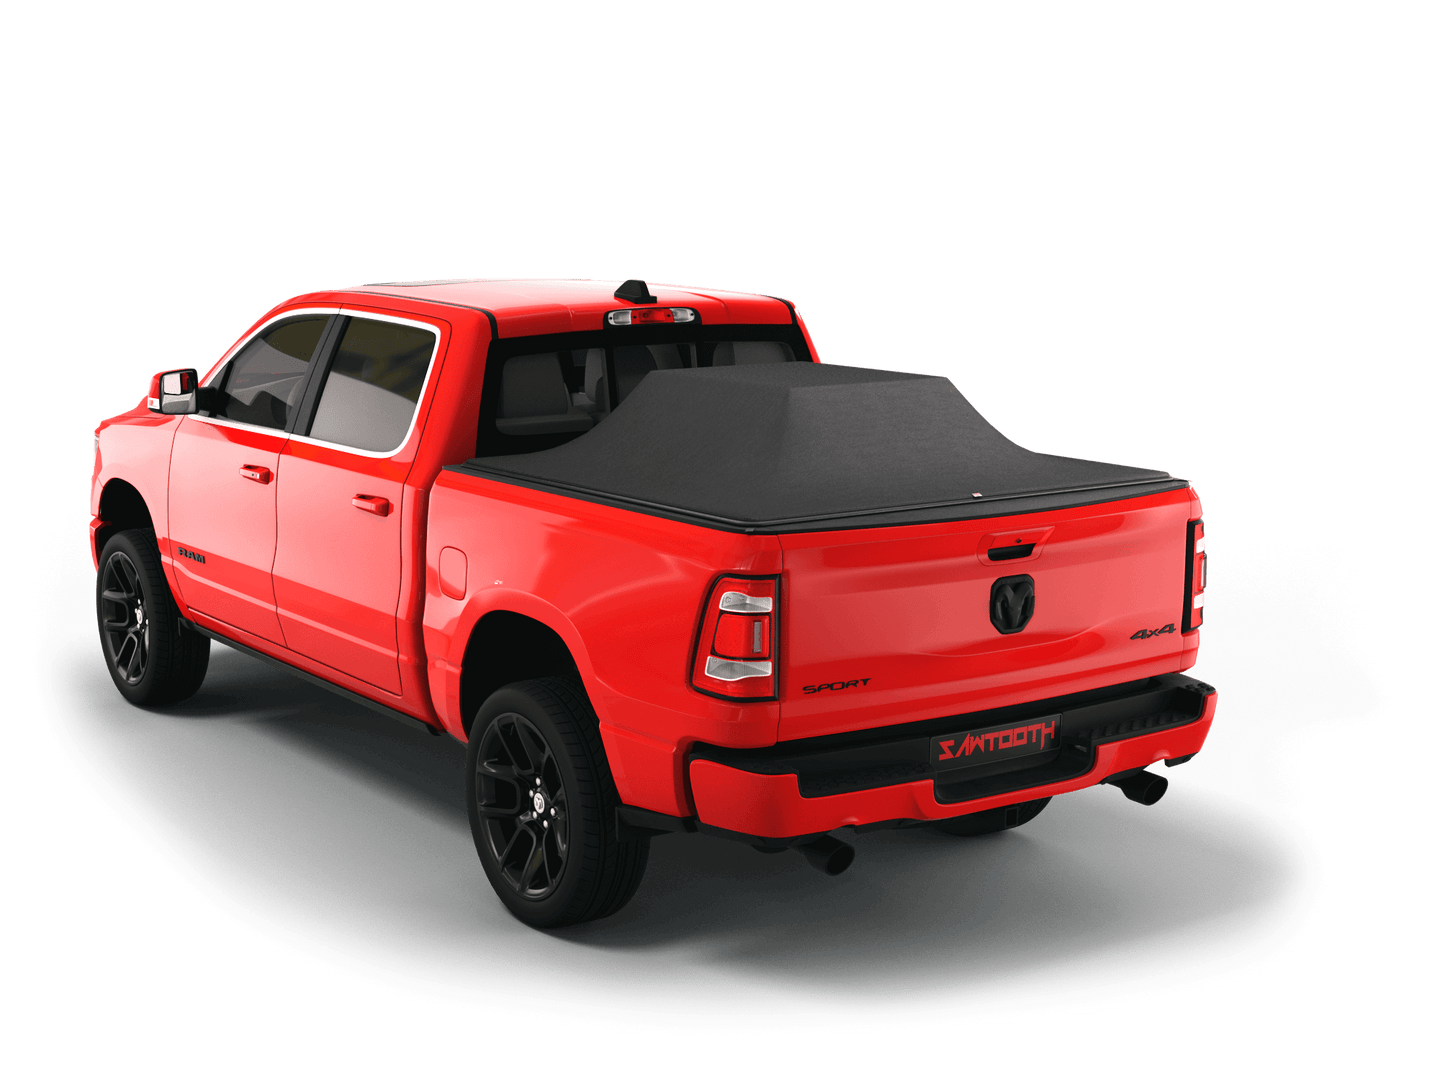 Red Ram 3500 with gear in the truck bed and the Sawtooth Stretch tonneau cover expanded over cargo load